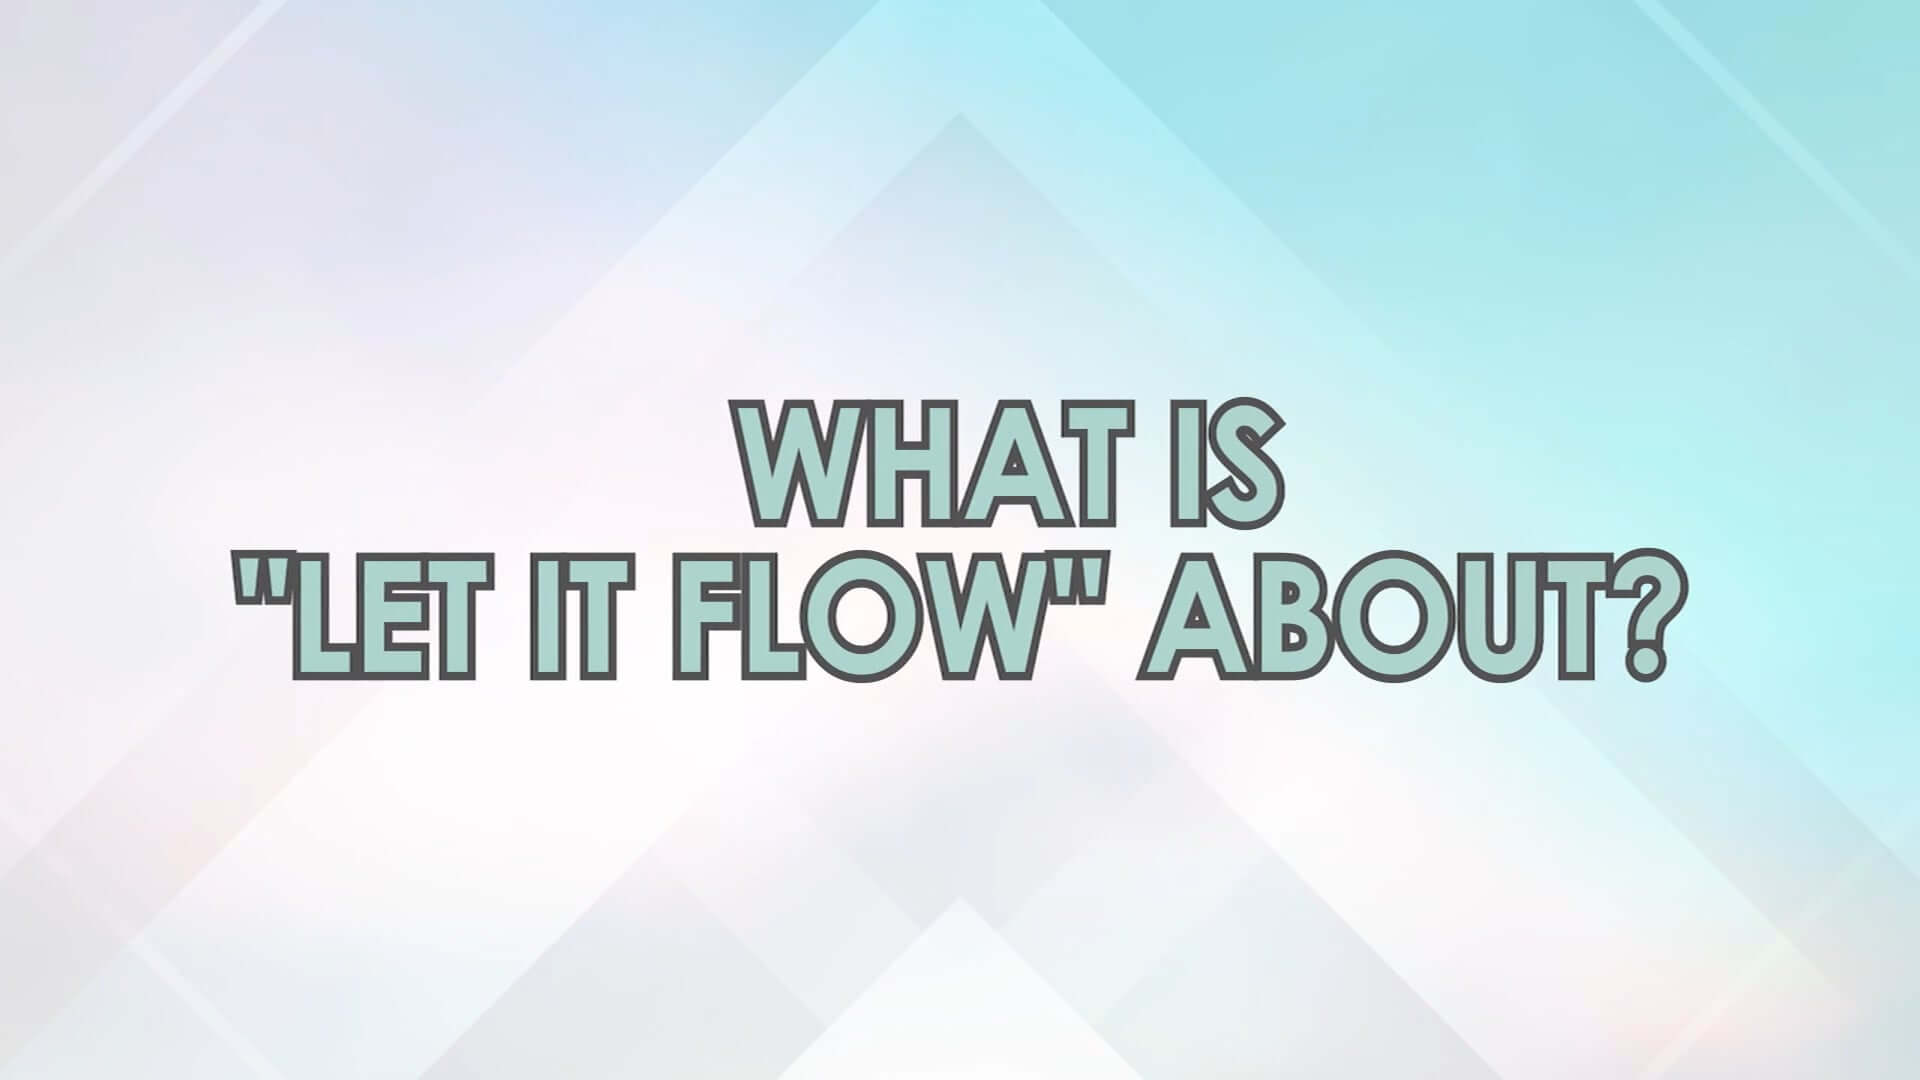 What is 'Let it flow' about?